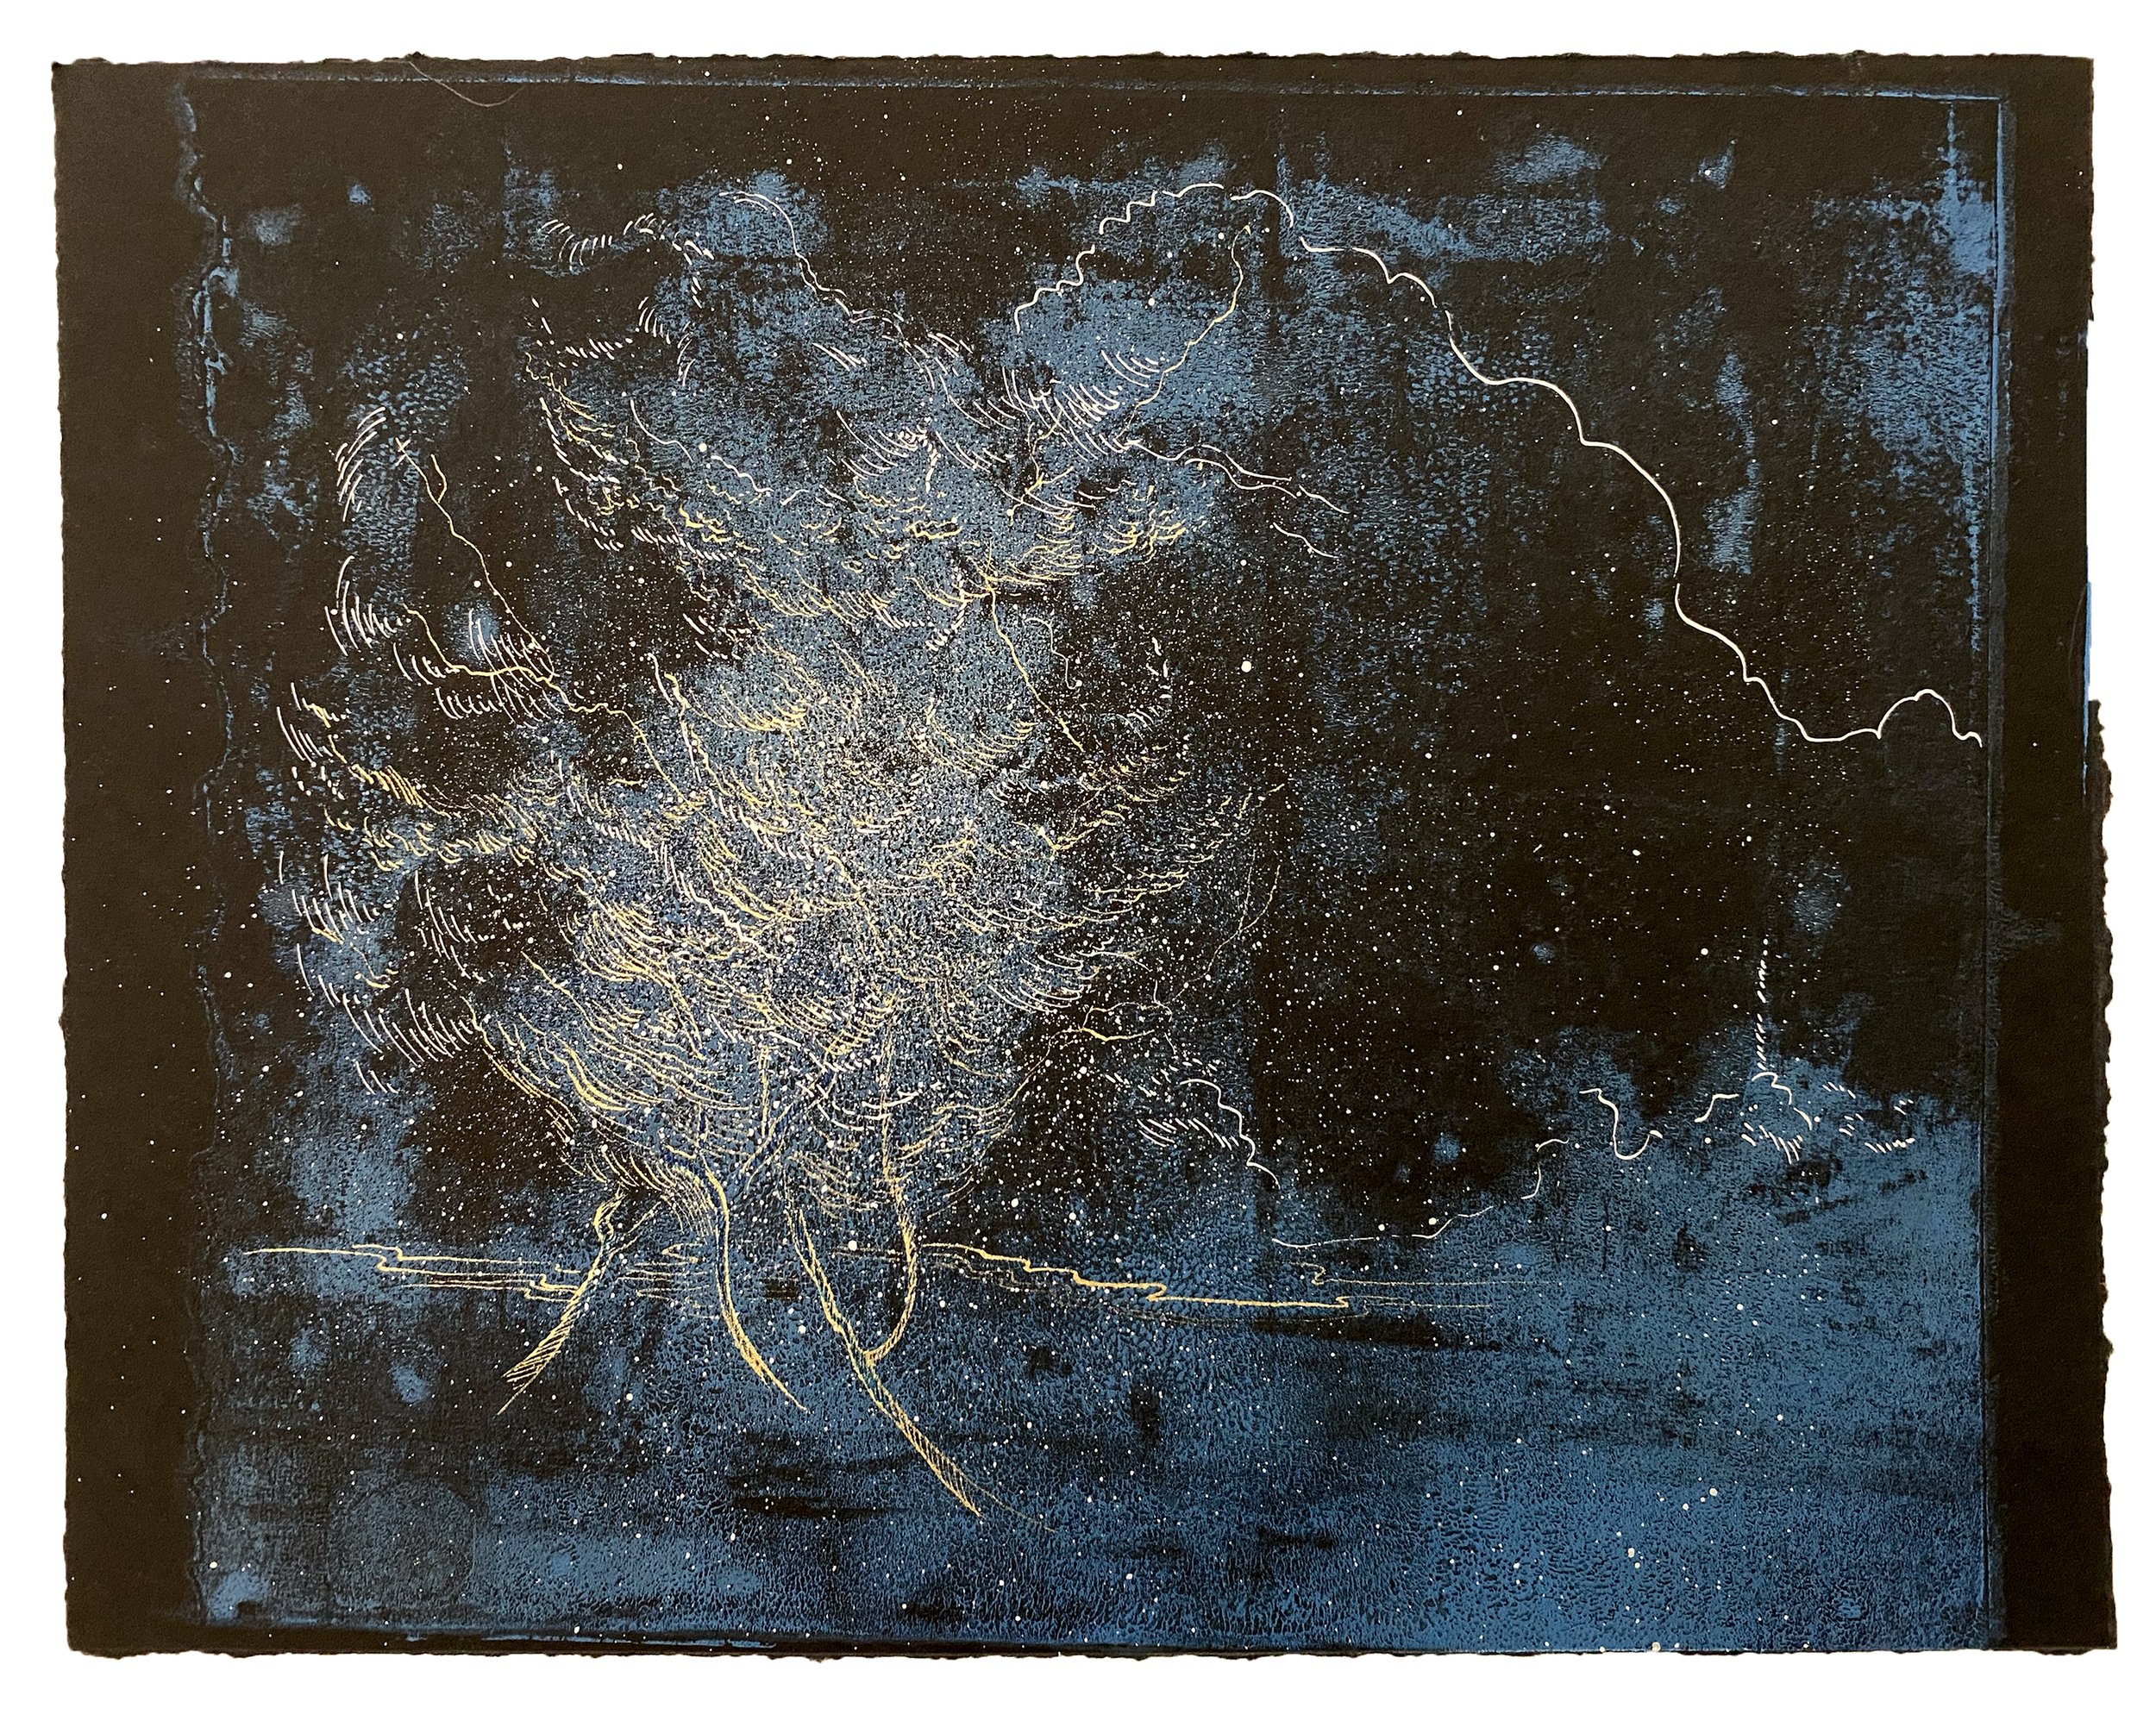   Glistering Tree  Acrylic mono-print, silver and gold ink on archival paper, framed under glass in brush gold aluminium,  25 x 26cm 2022 